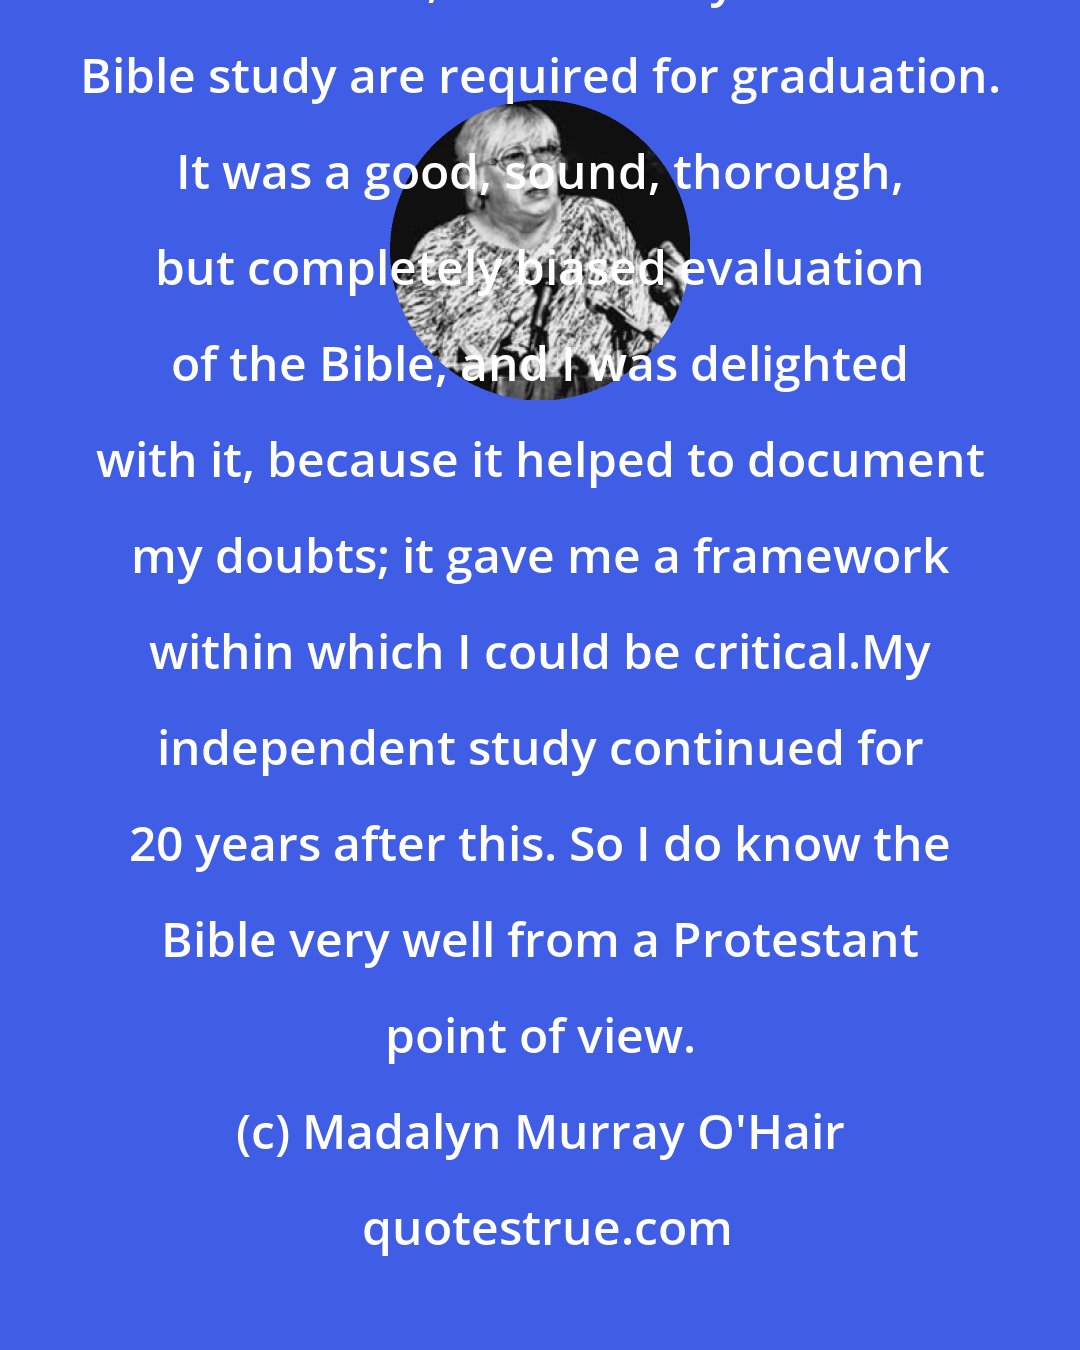 Madalyn Murray O'Hair: I went off to college, a good, middle-class, very proper college, a Brethren institution, where two years of Bible study are required for graduation. It was a good, sound, thorough, but completely biased evaluation of the Bible, and I was delighted with it, because it helped to document my doubts; it gave me a framework within which I could be critical.My independent study continued for 20 years after this. So I do know the Bible very well from a Protestant point of view.